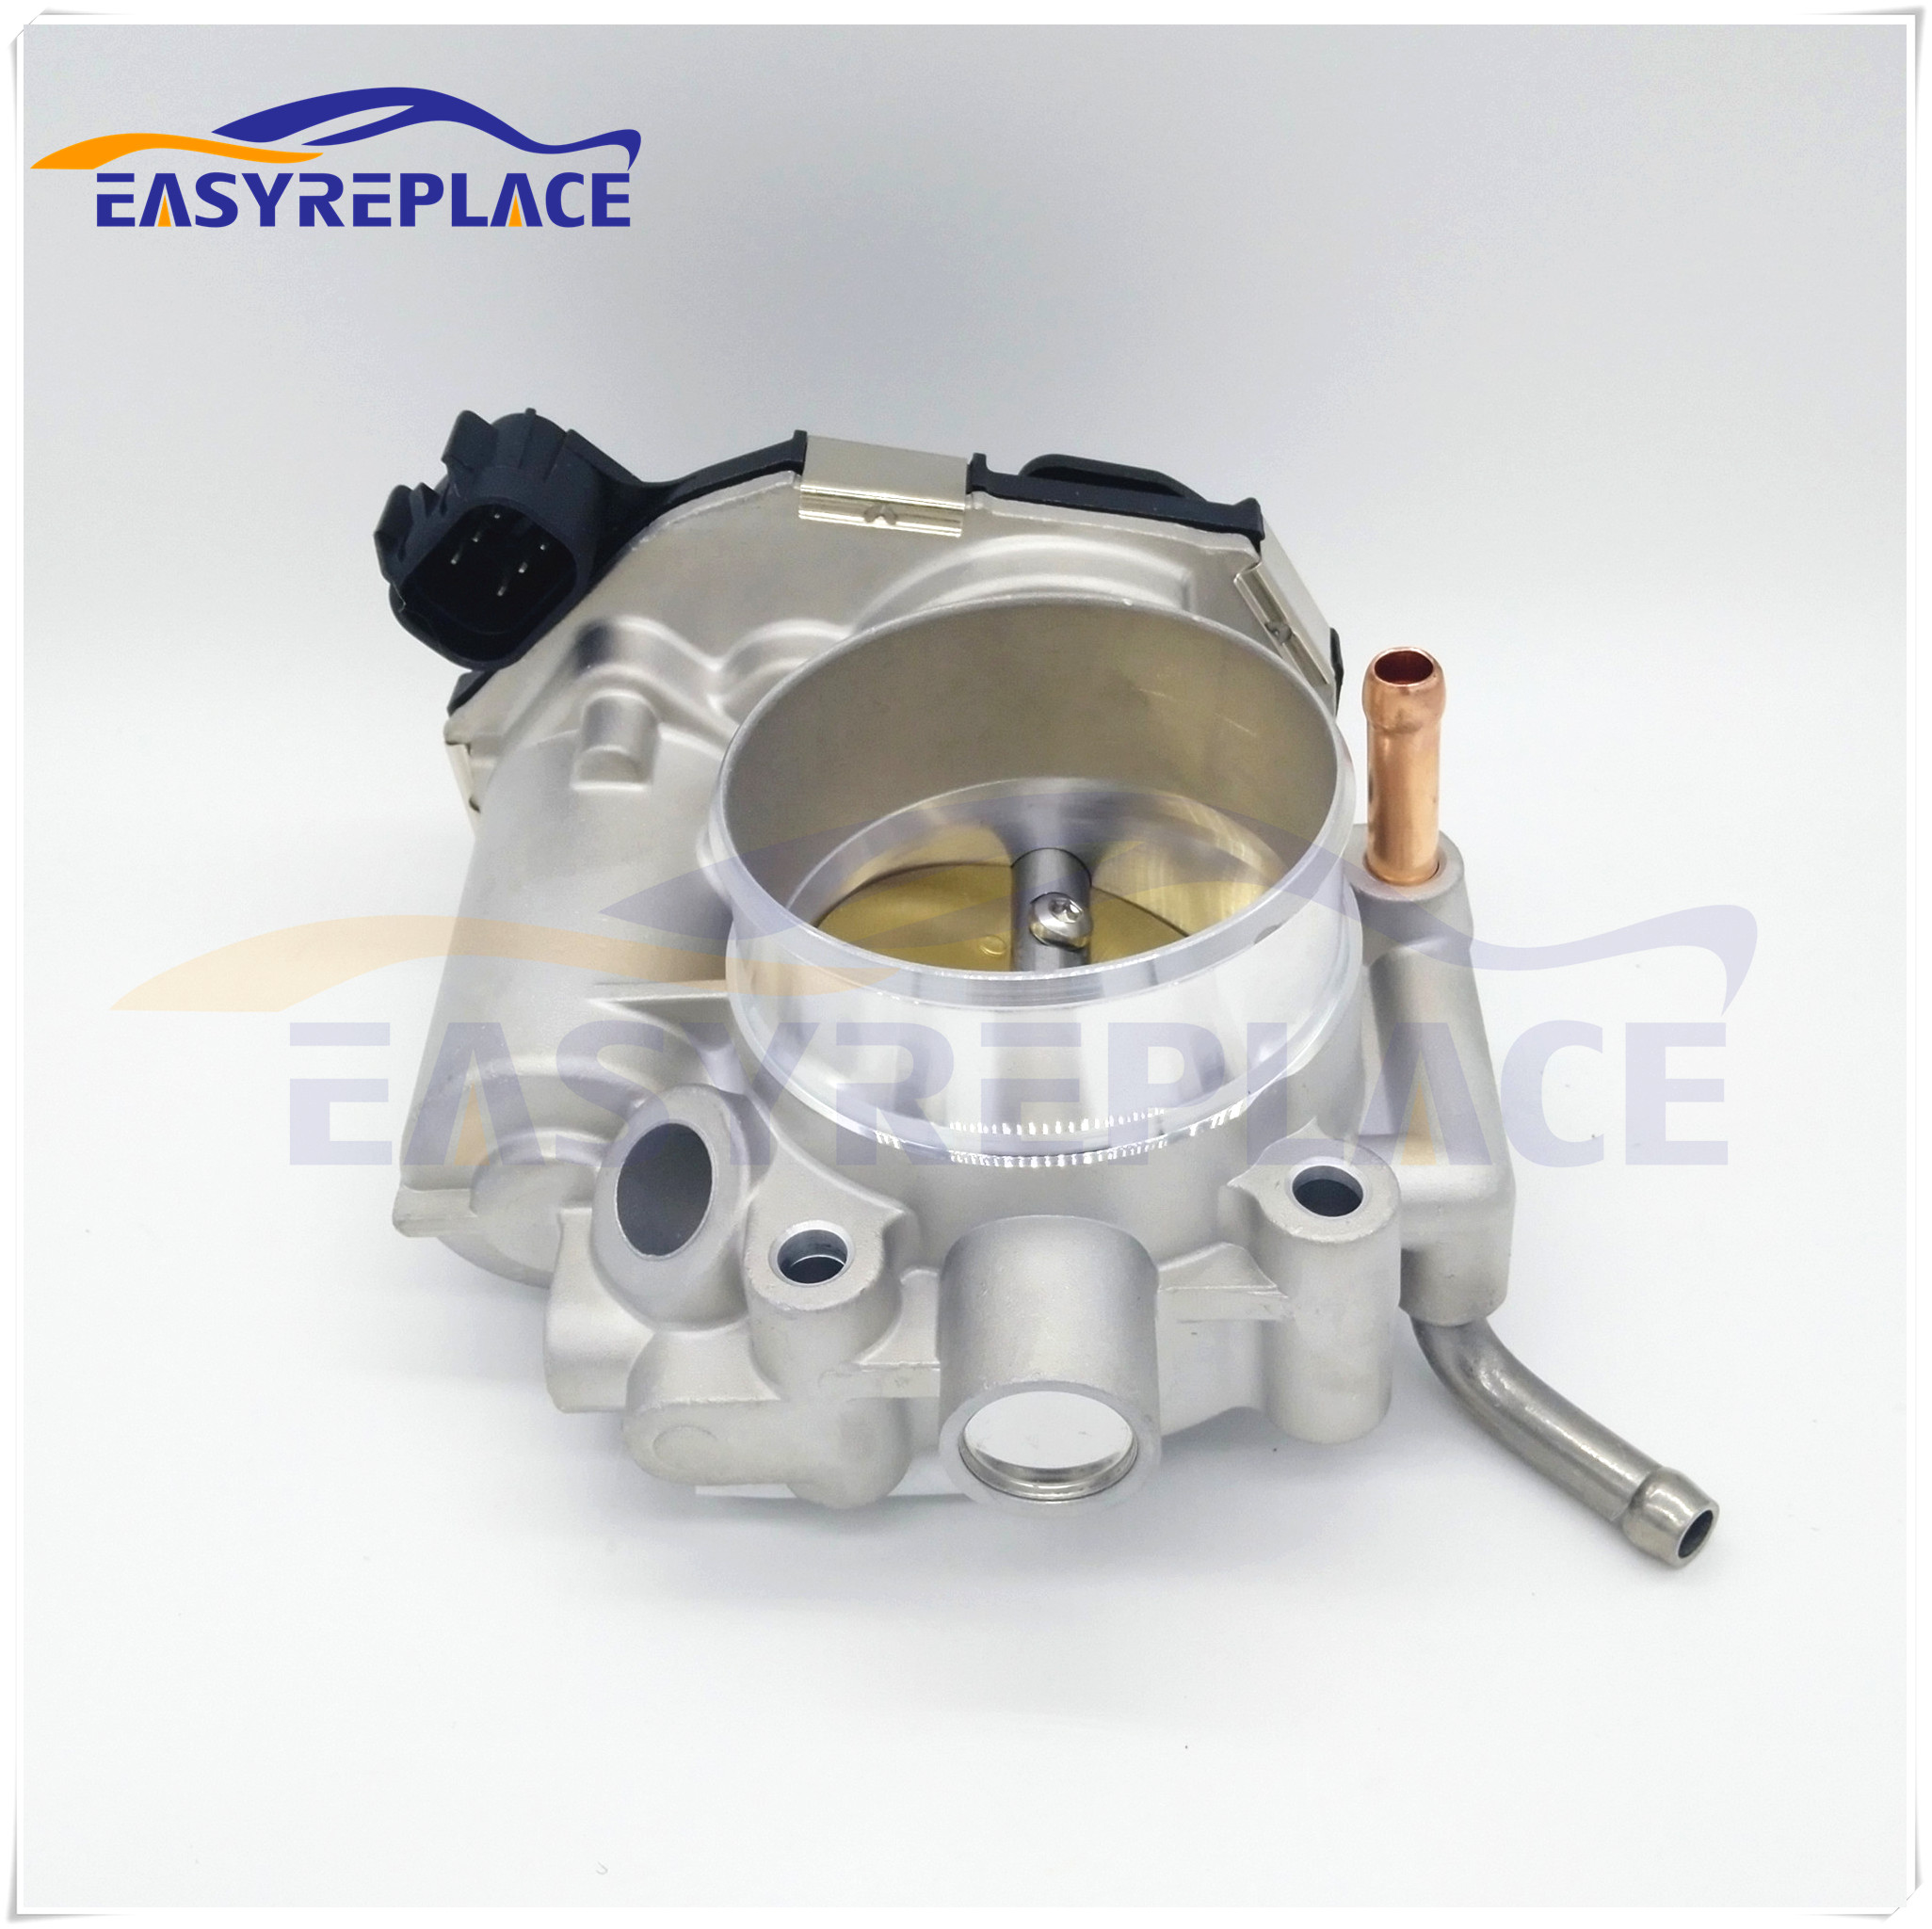 Fuel Injection Brand New Throttle body Valve OE: 96817600 0280750494 For Chevrolet cruze 1.6L 109 Horse Power